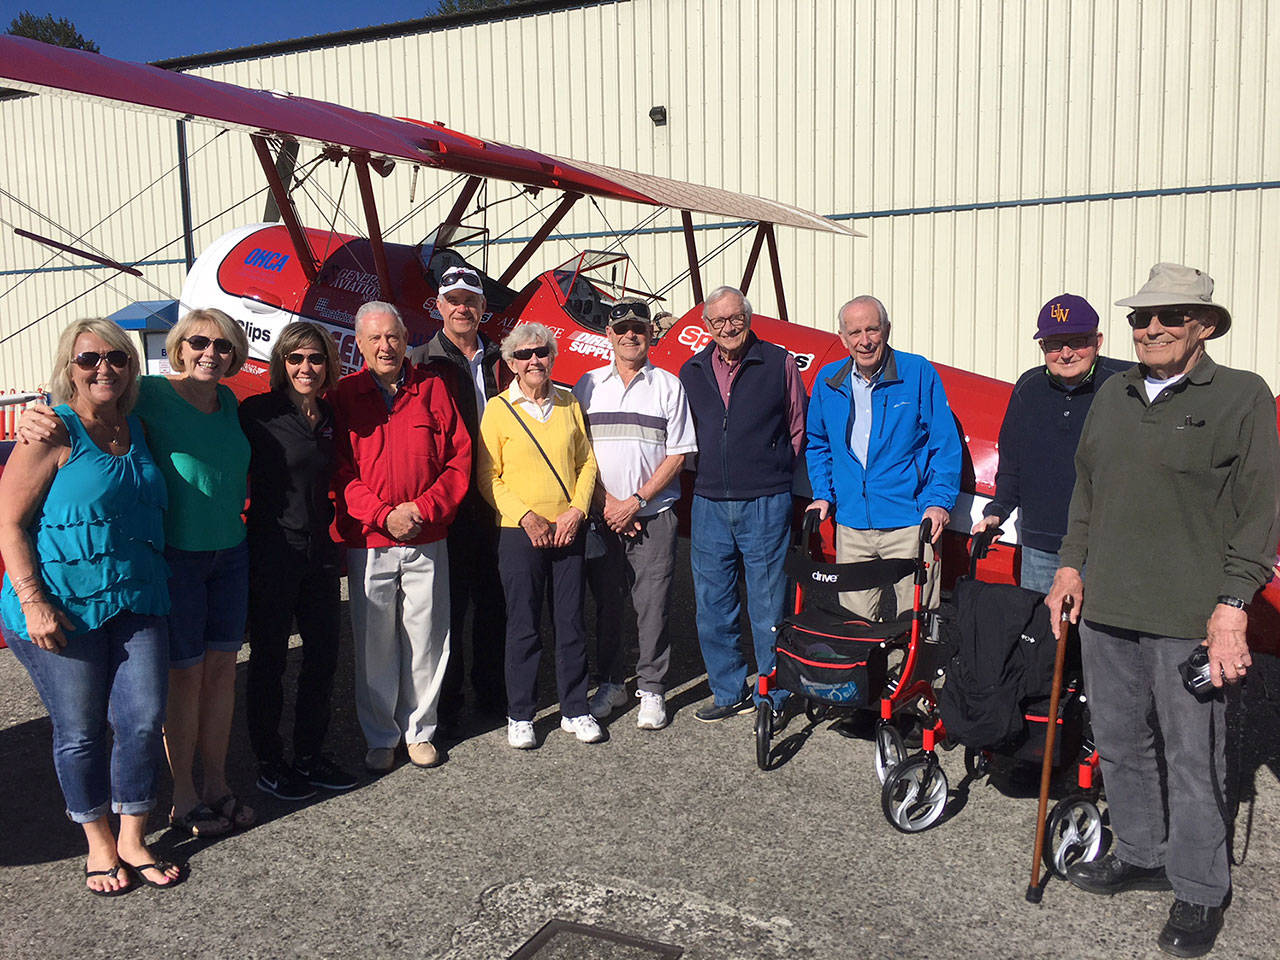 From right, Covenant Shores staff Roxanne Helleren and Leslie McGee pose with sponsor Sports Clip’s Andrea Wick, resident Bob Weber, pilot Mike Sommars and residents Bette Bjornestad, Ron Ross, Charlie Hammer, Owen Hall, Zip Zuther and Joe Morton.